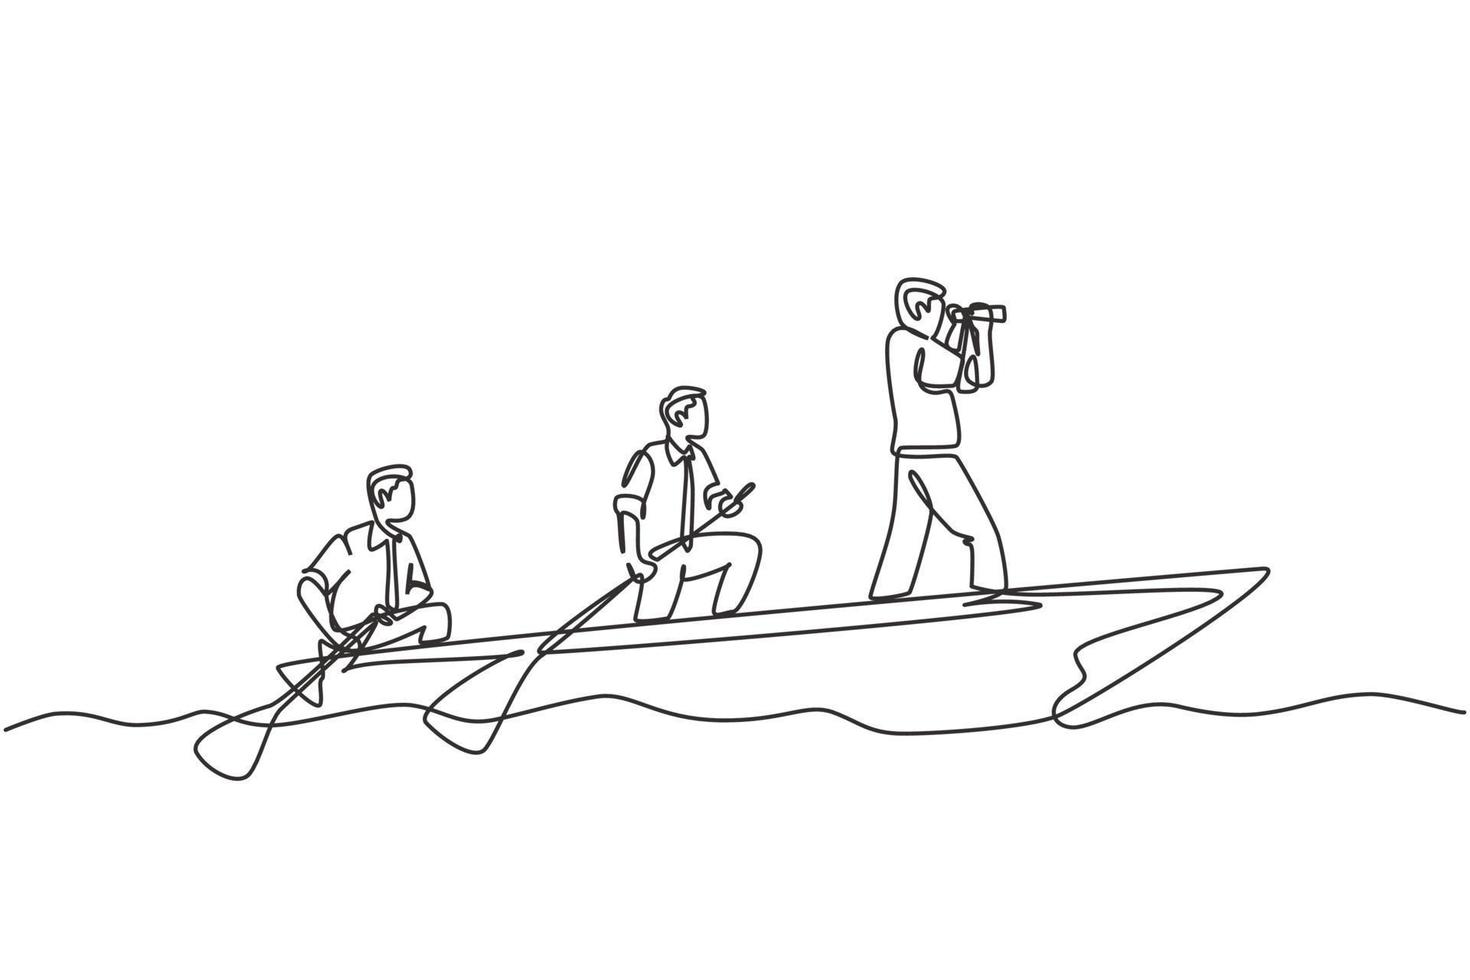 One single line drawing of young male team member take a boat heading to an island while the leader navigate them using binocular. Teamwork concept continuous line draw design vector illustration